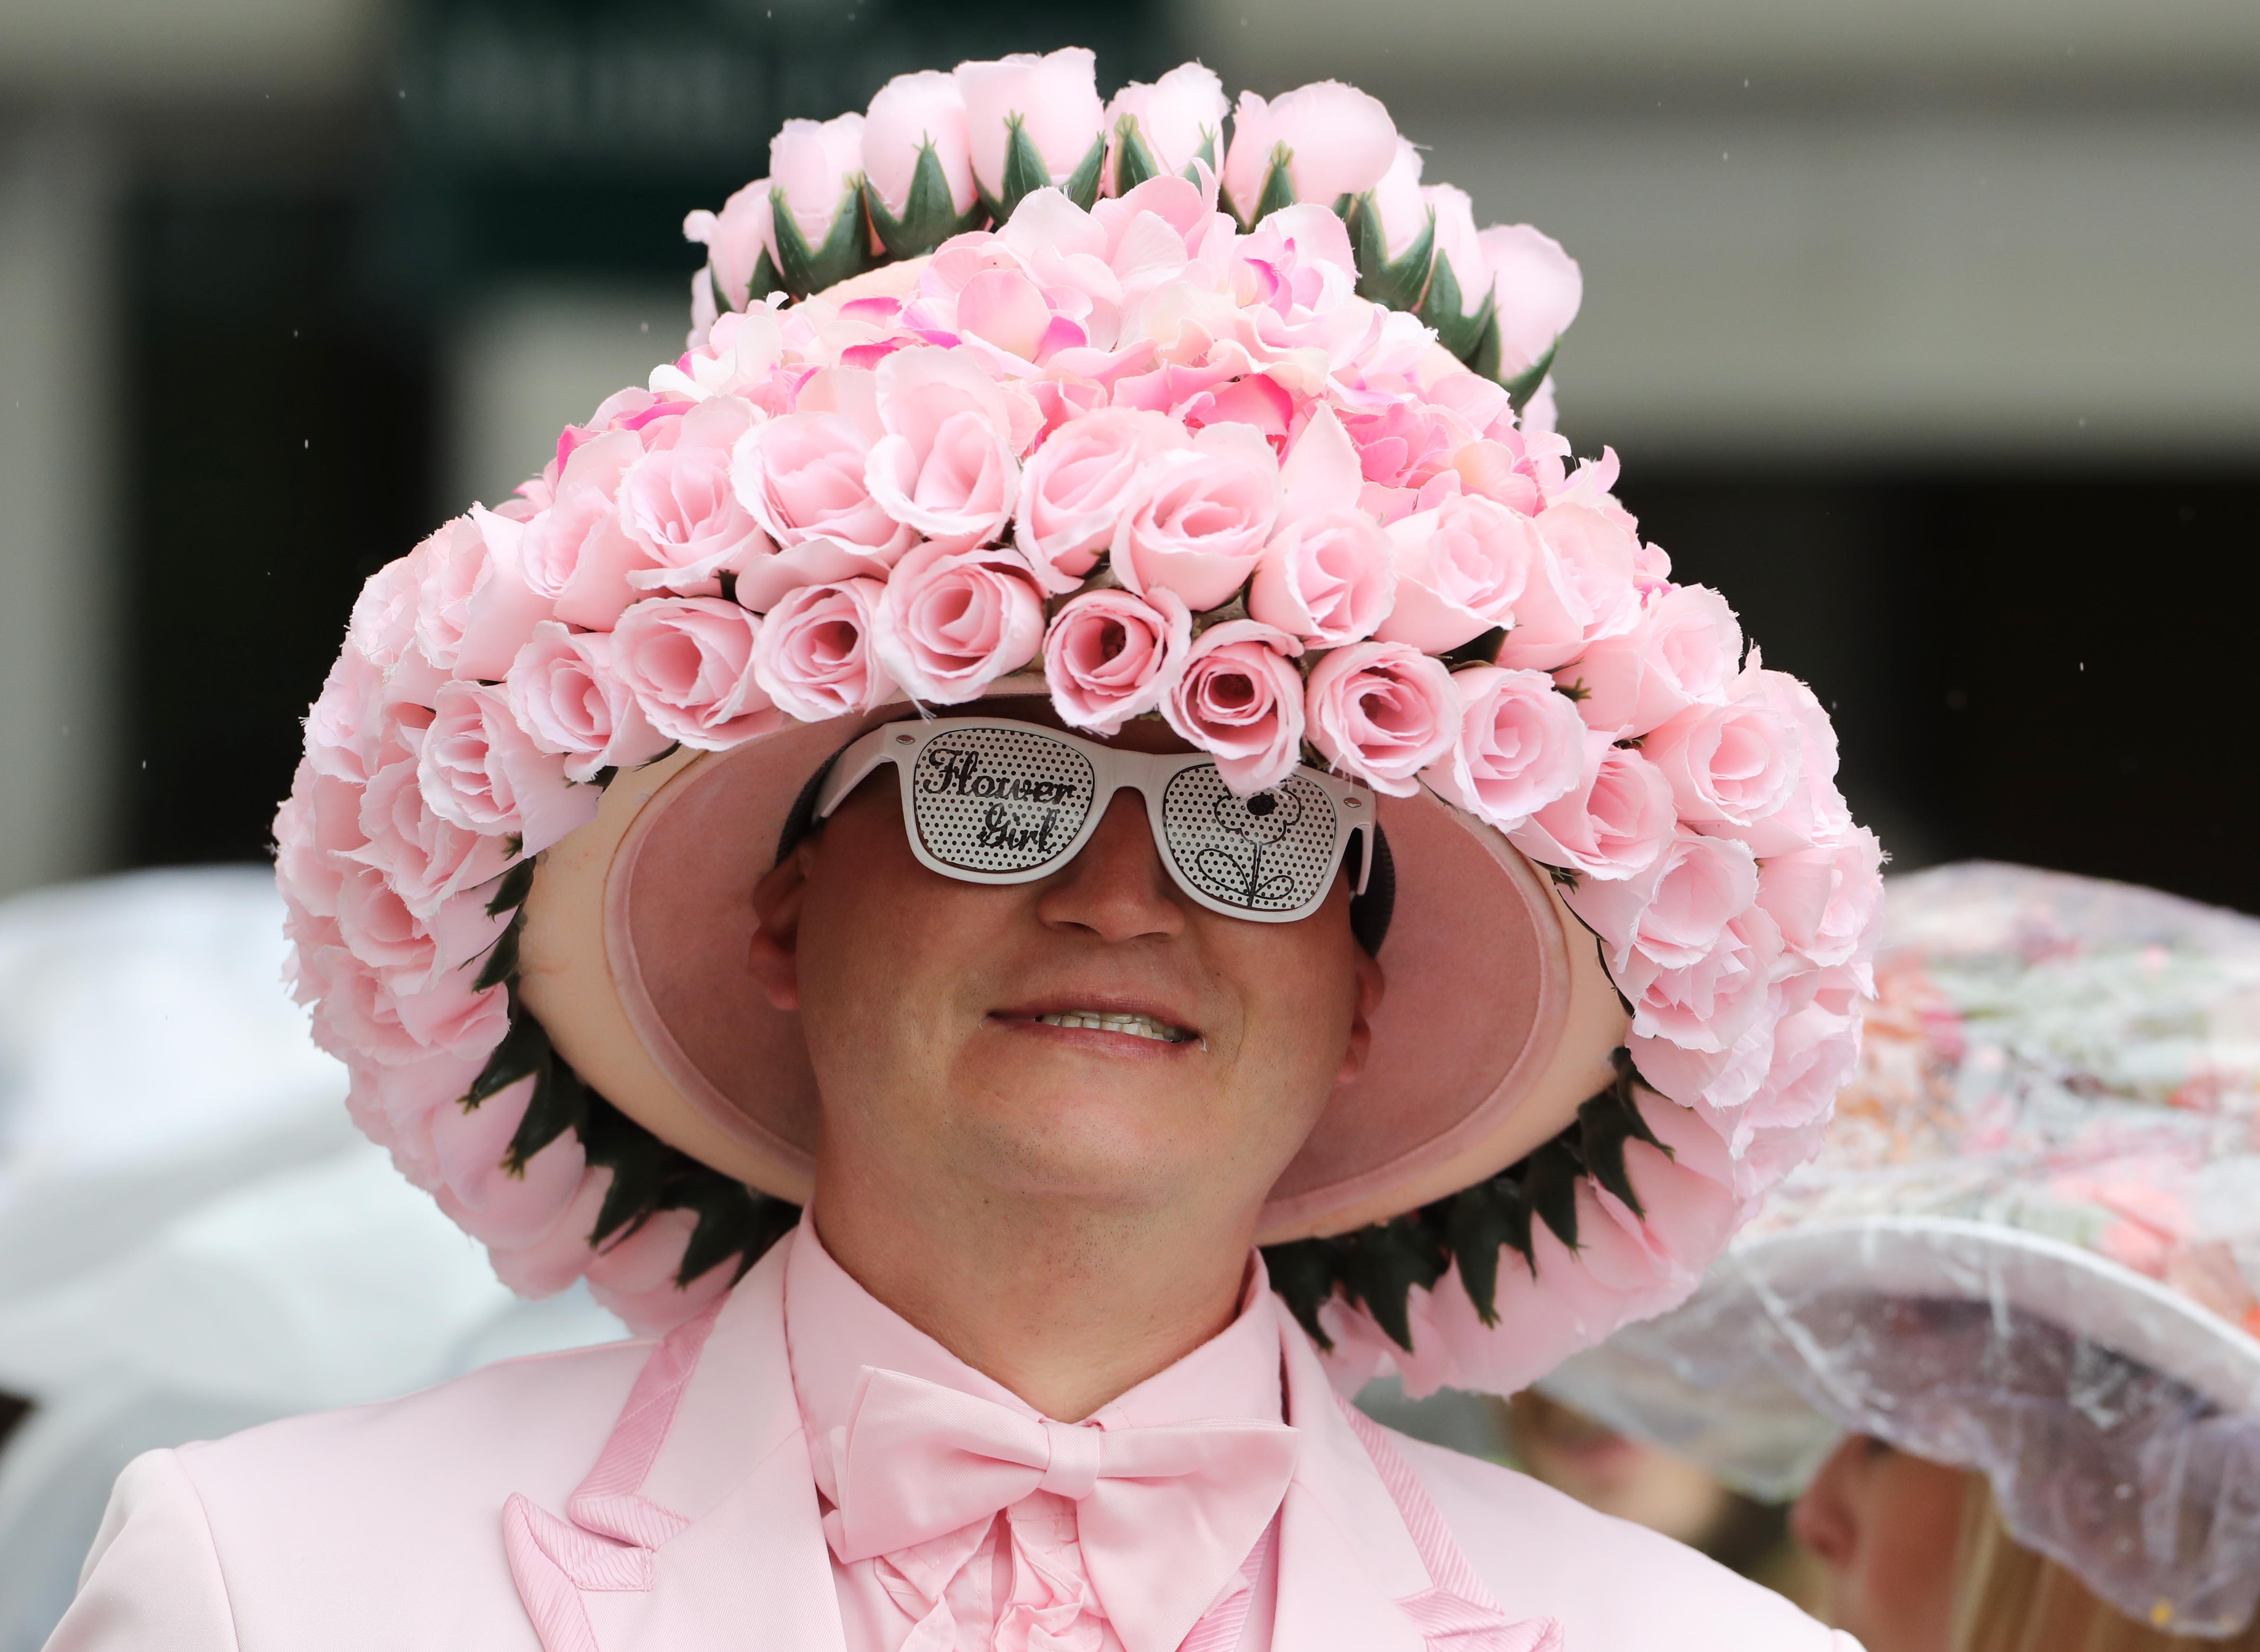 Kentucky Derby hats were crazy in 2017, as always, but we found the